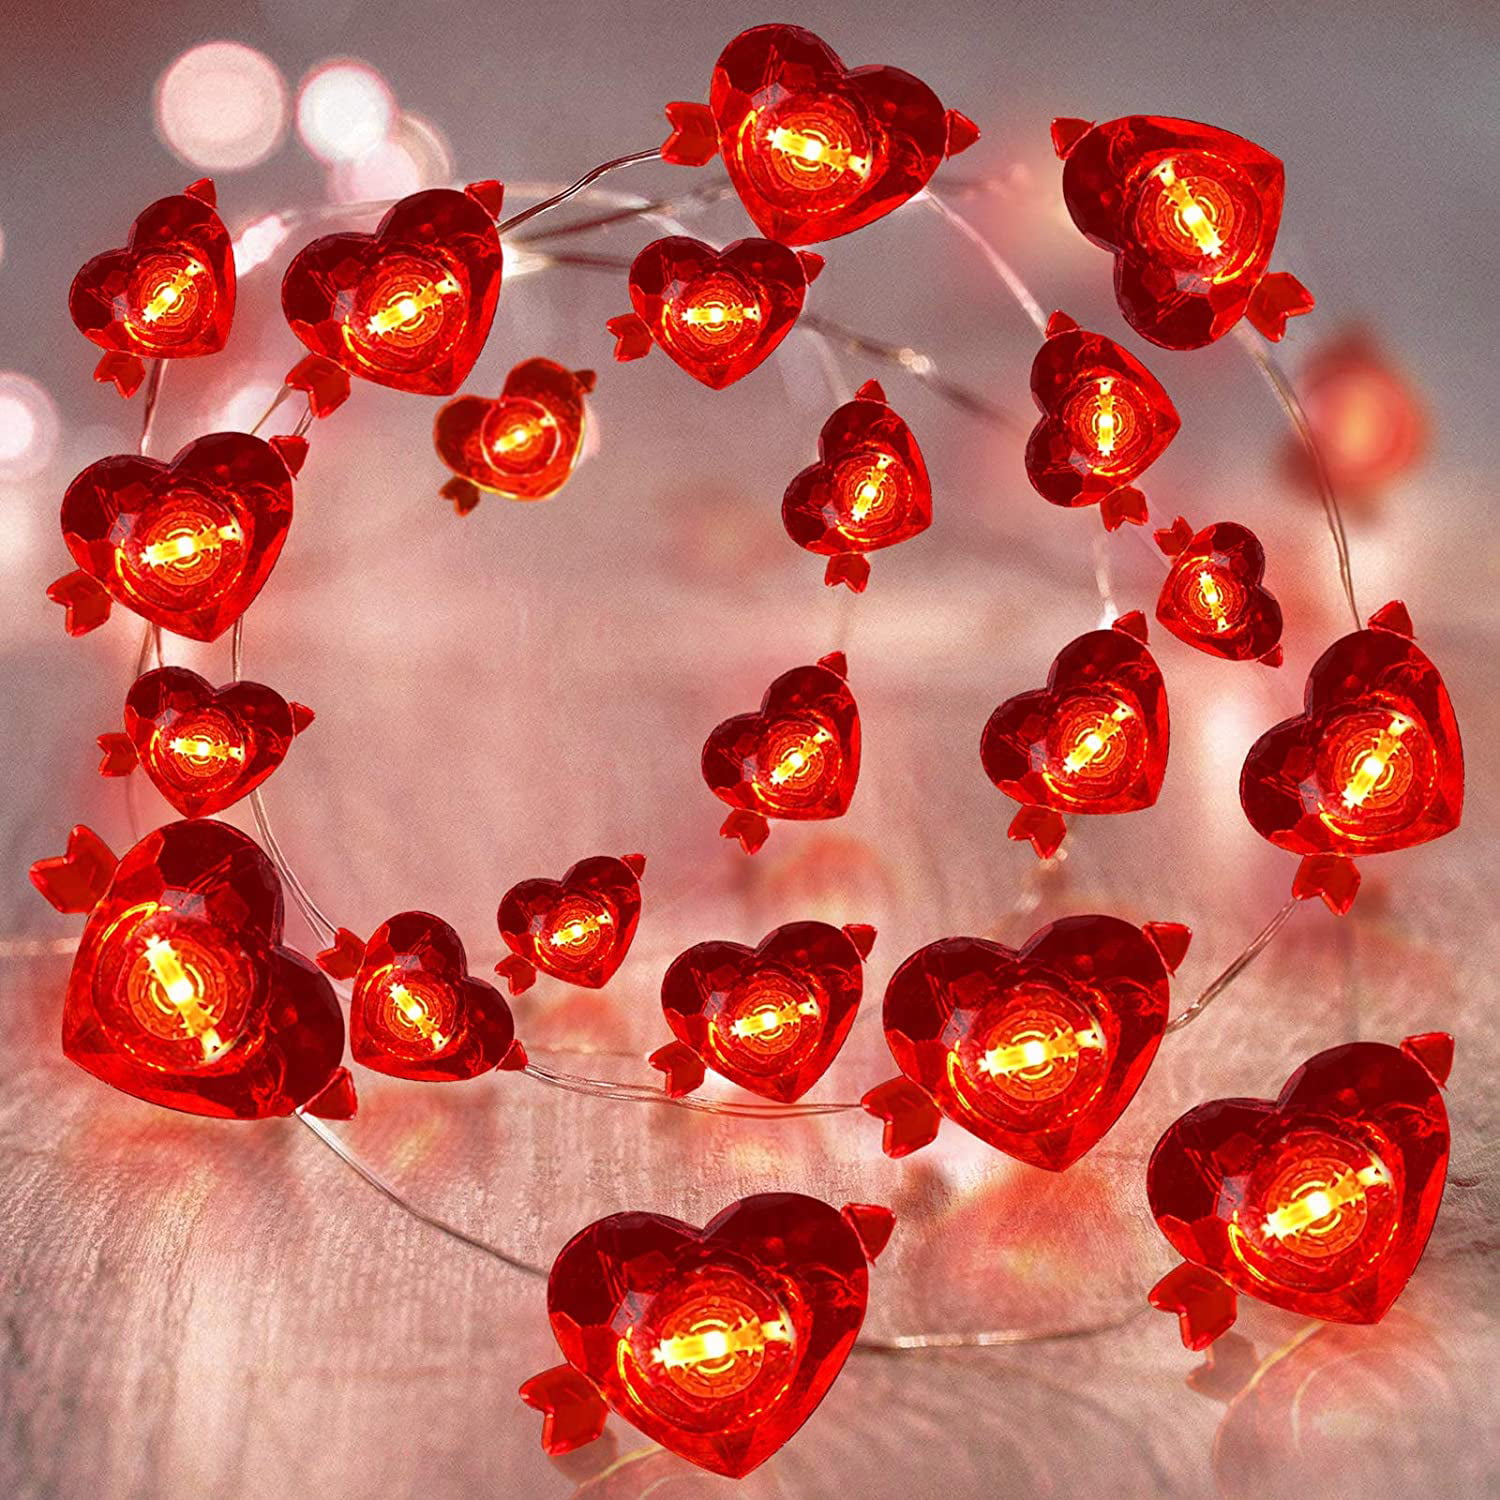 Red Love Heart Shaped 40 LED Fairy String Lights Valentine Wedding Gift Home Decor